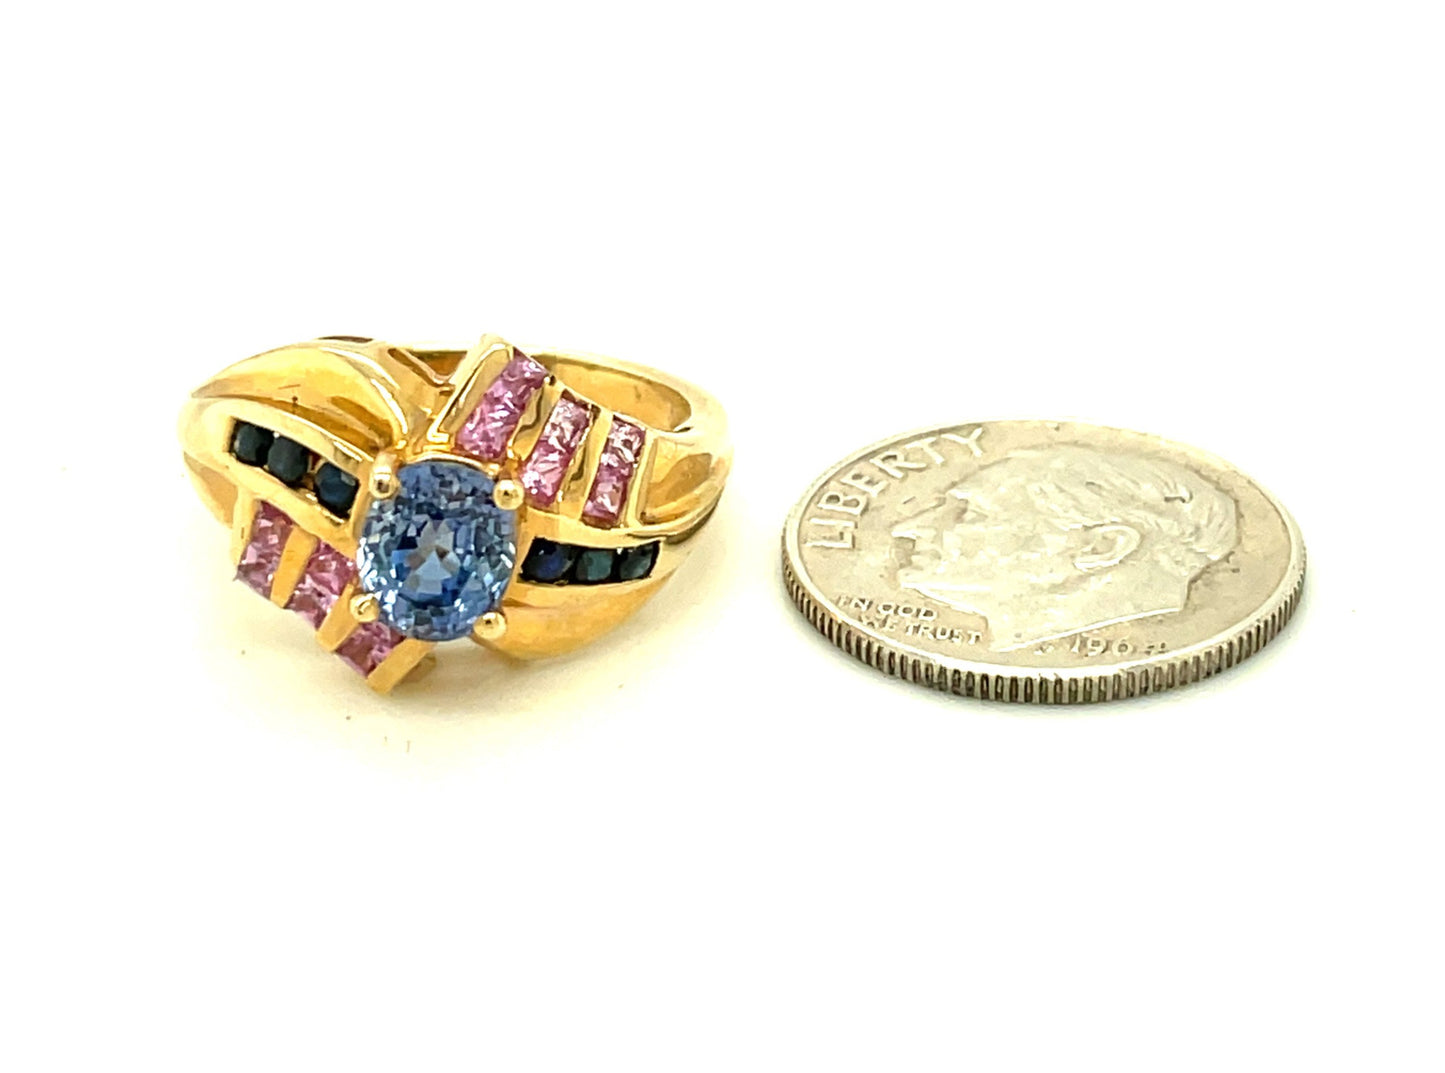 Vintage 10k Ring with Multicolored Spinel Stones Size 5